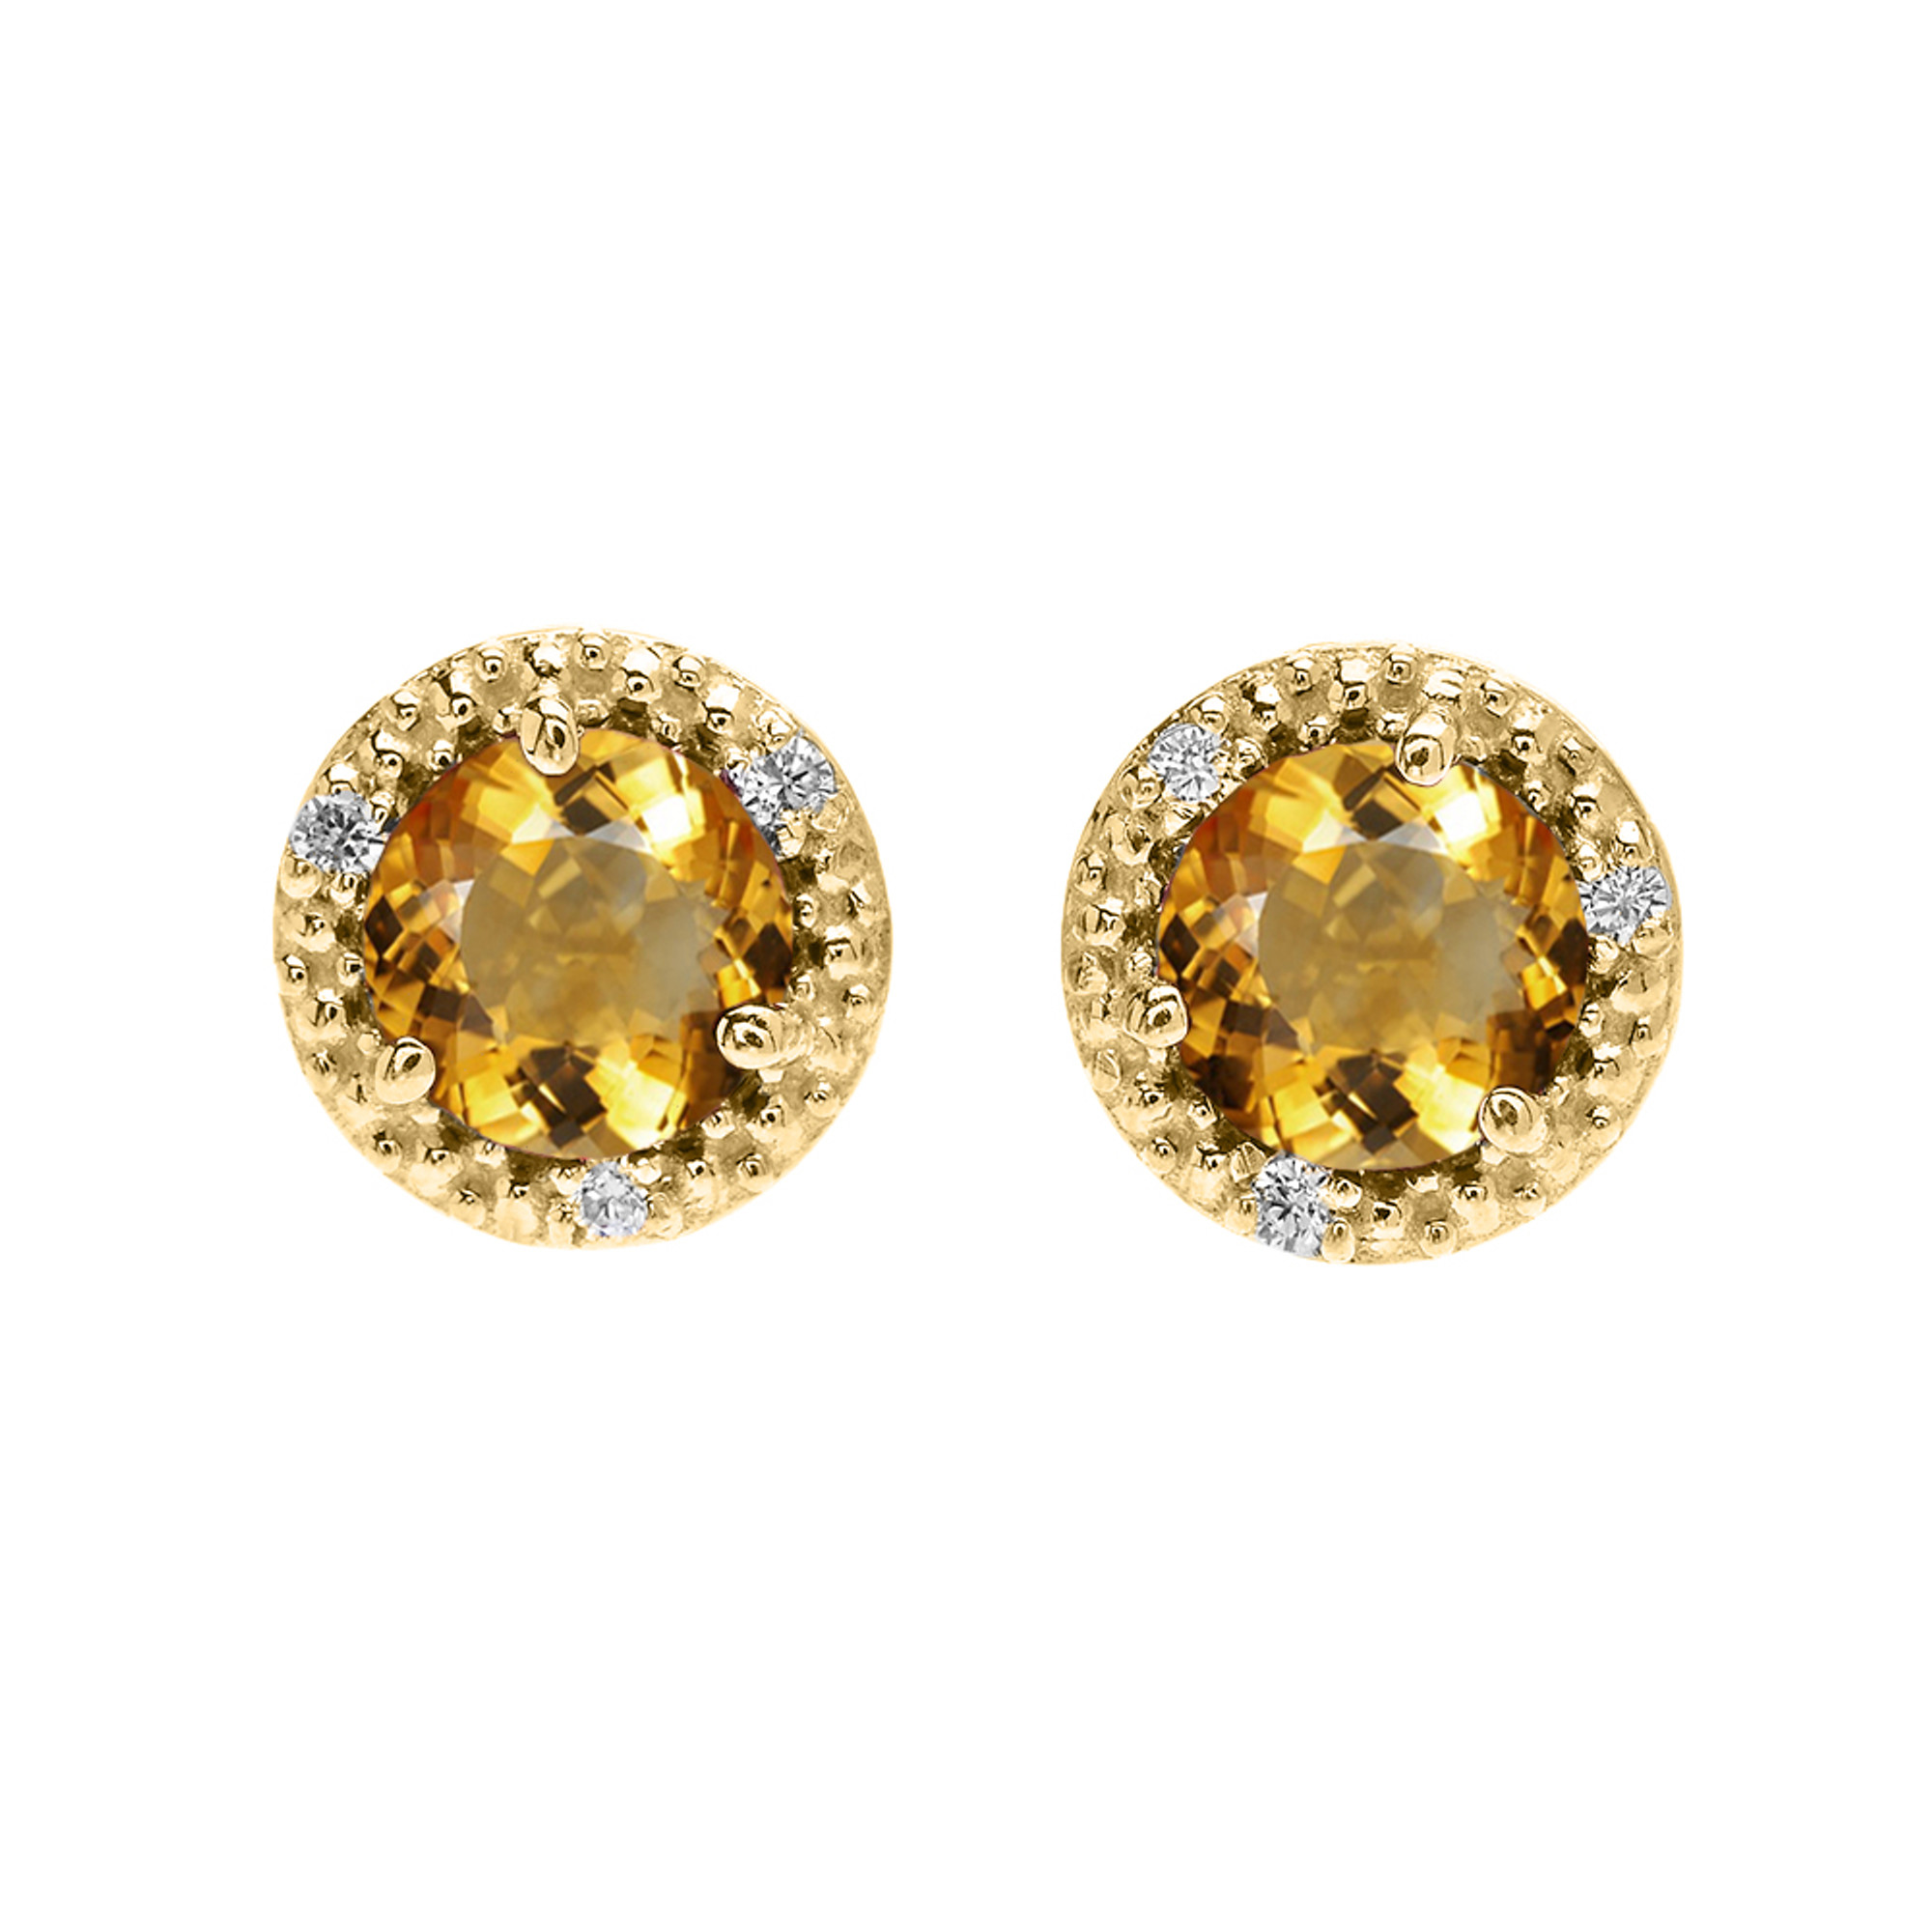 14K Gold Halo Stud Earrings with Solitaire Citrine and Diamonds